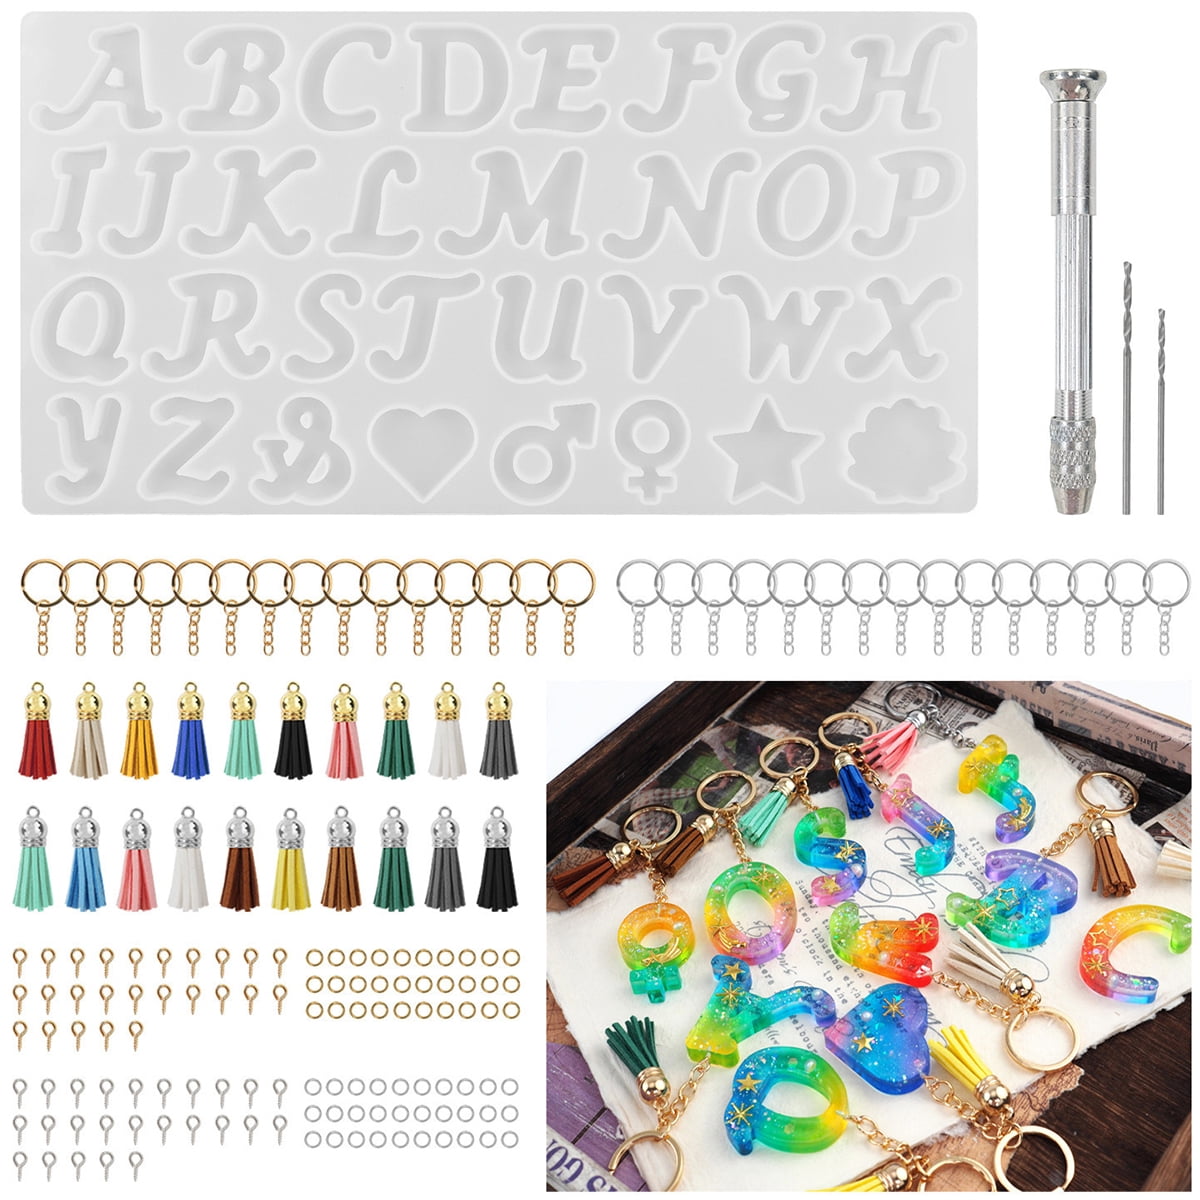 Jaysuing Teeth Jewel Kit Tooth Jewelry Shiny Paste Spice Jewelry Easy  Removal And Easy Installation Crystal Dental Drill